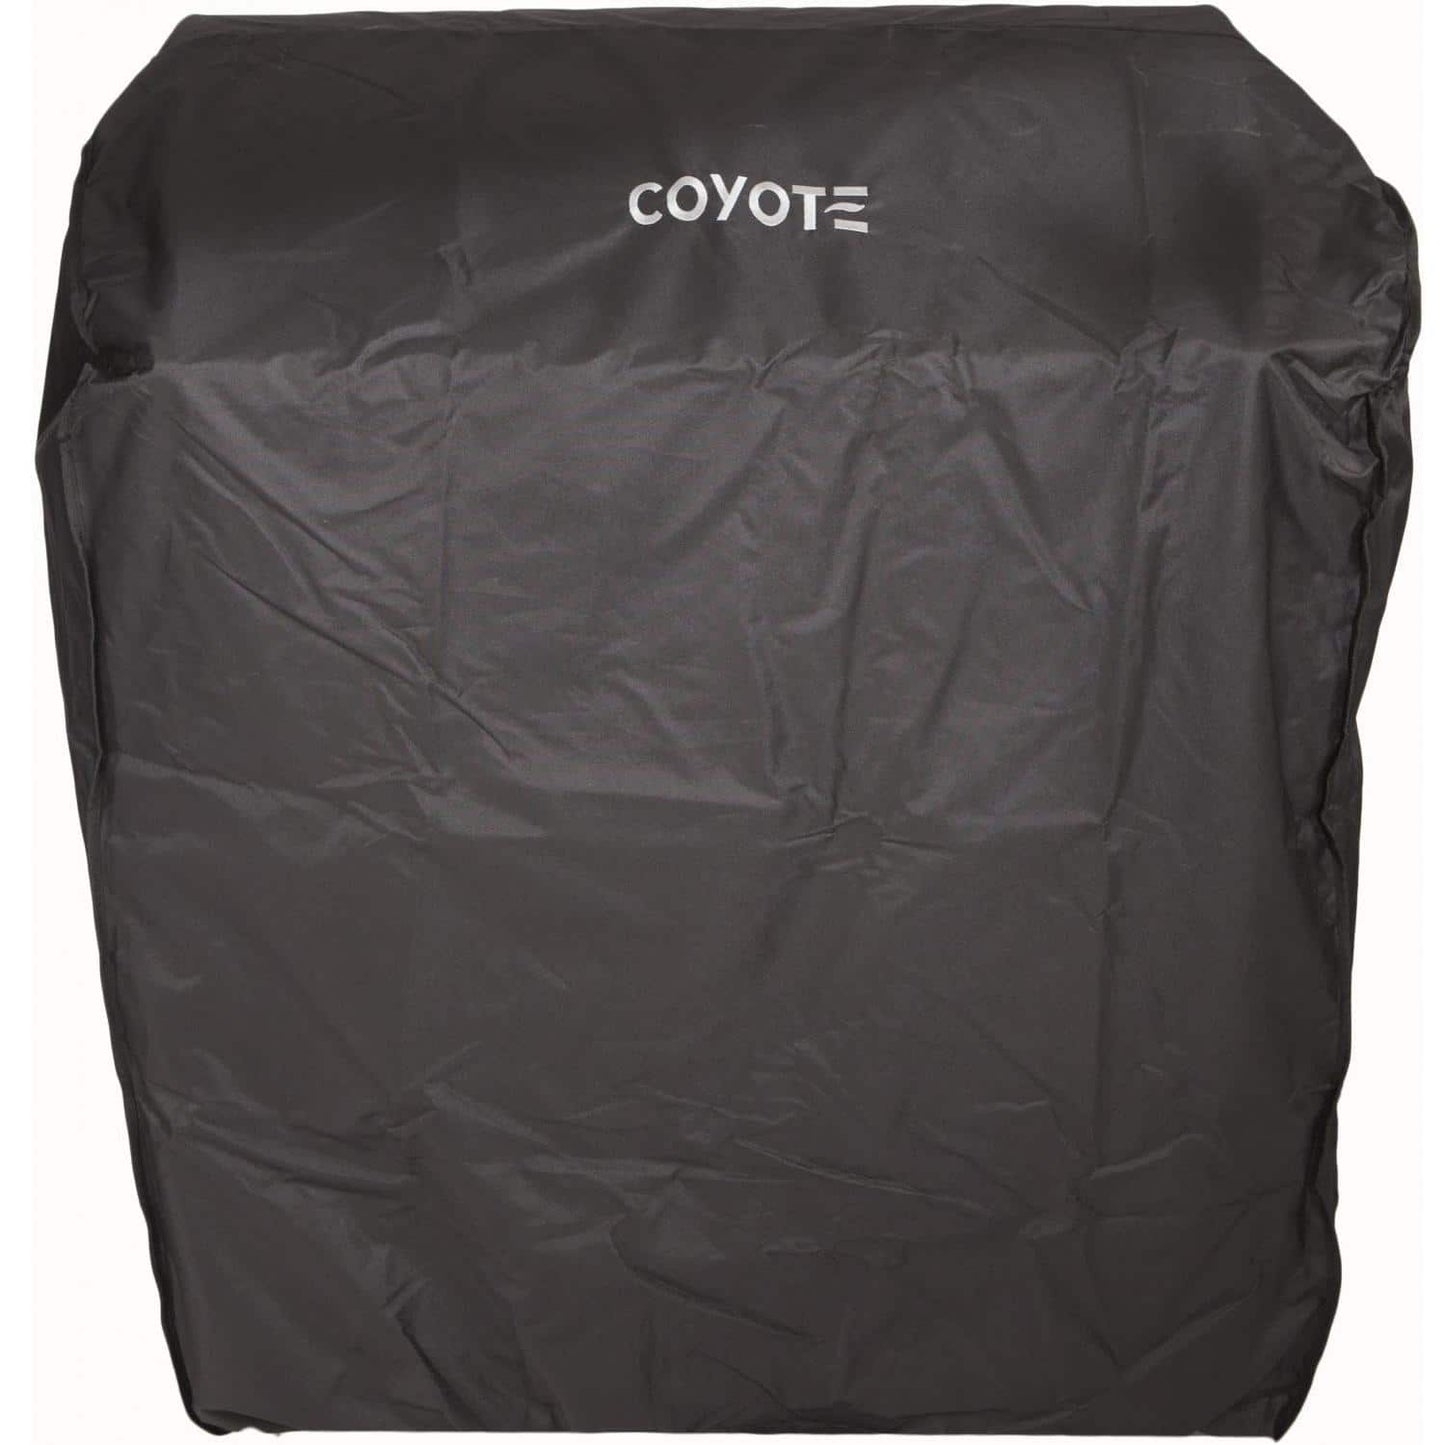 Coyote 36 Inch Grill Cover – On Cart